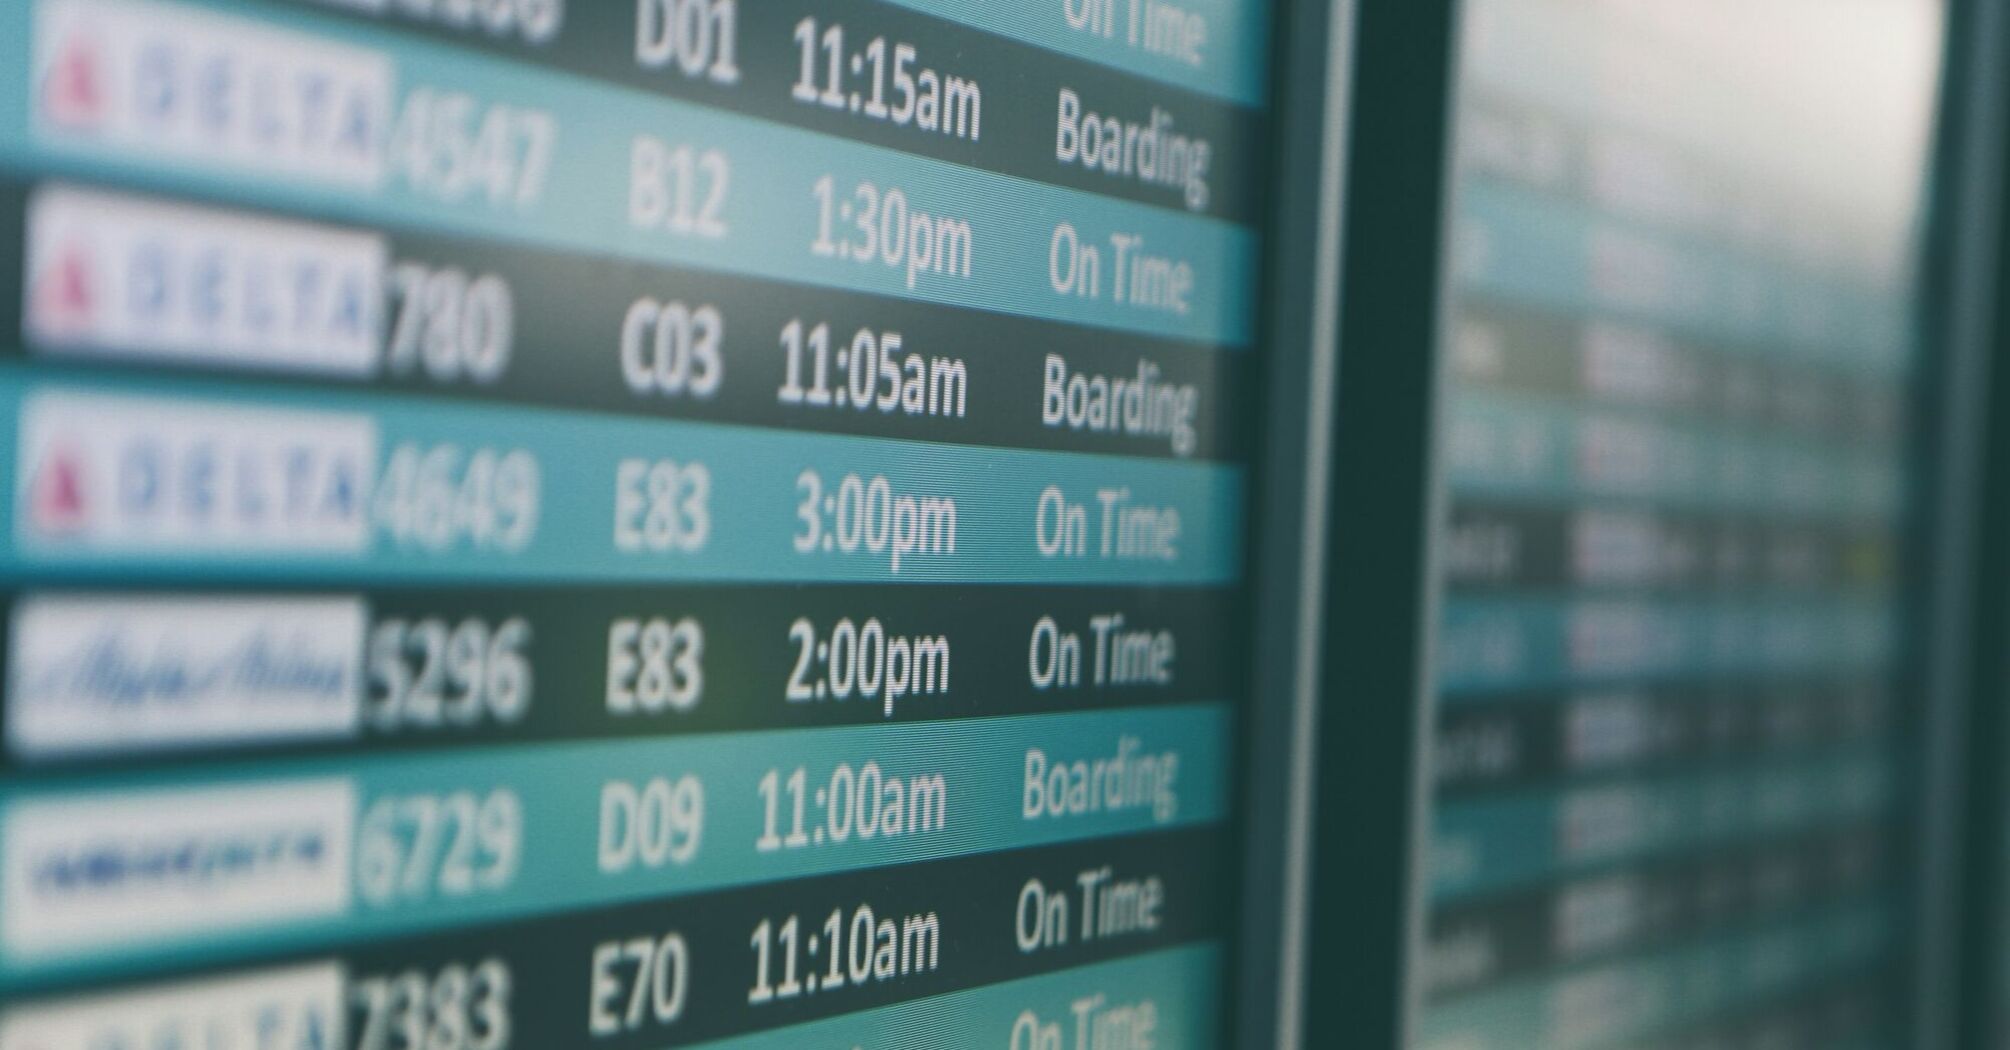 Airport departures timetable showing delta and alaska airlines flights on time and boarding